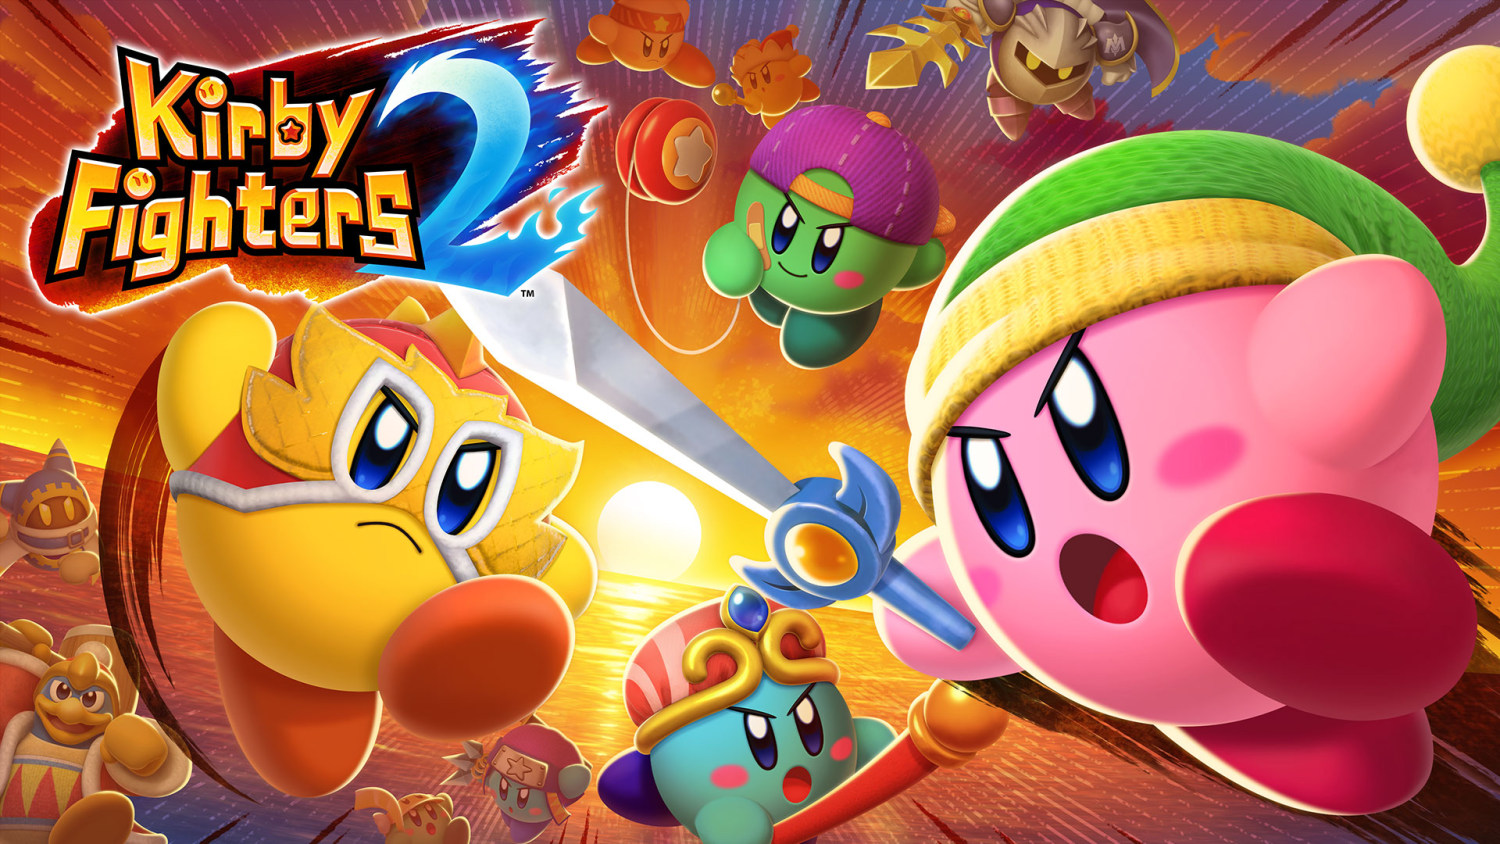 DomingoGamer: Kirby Fighters 2